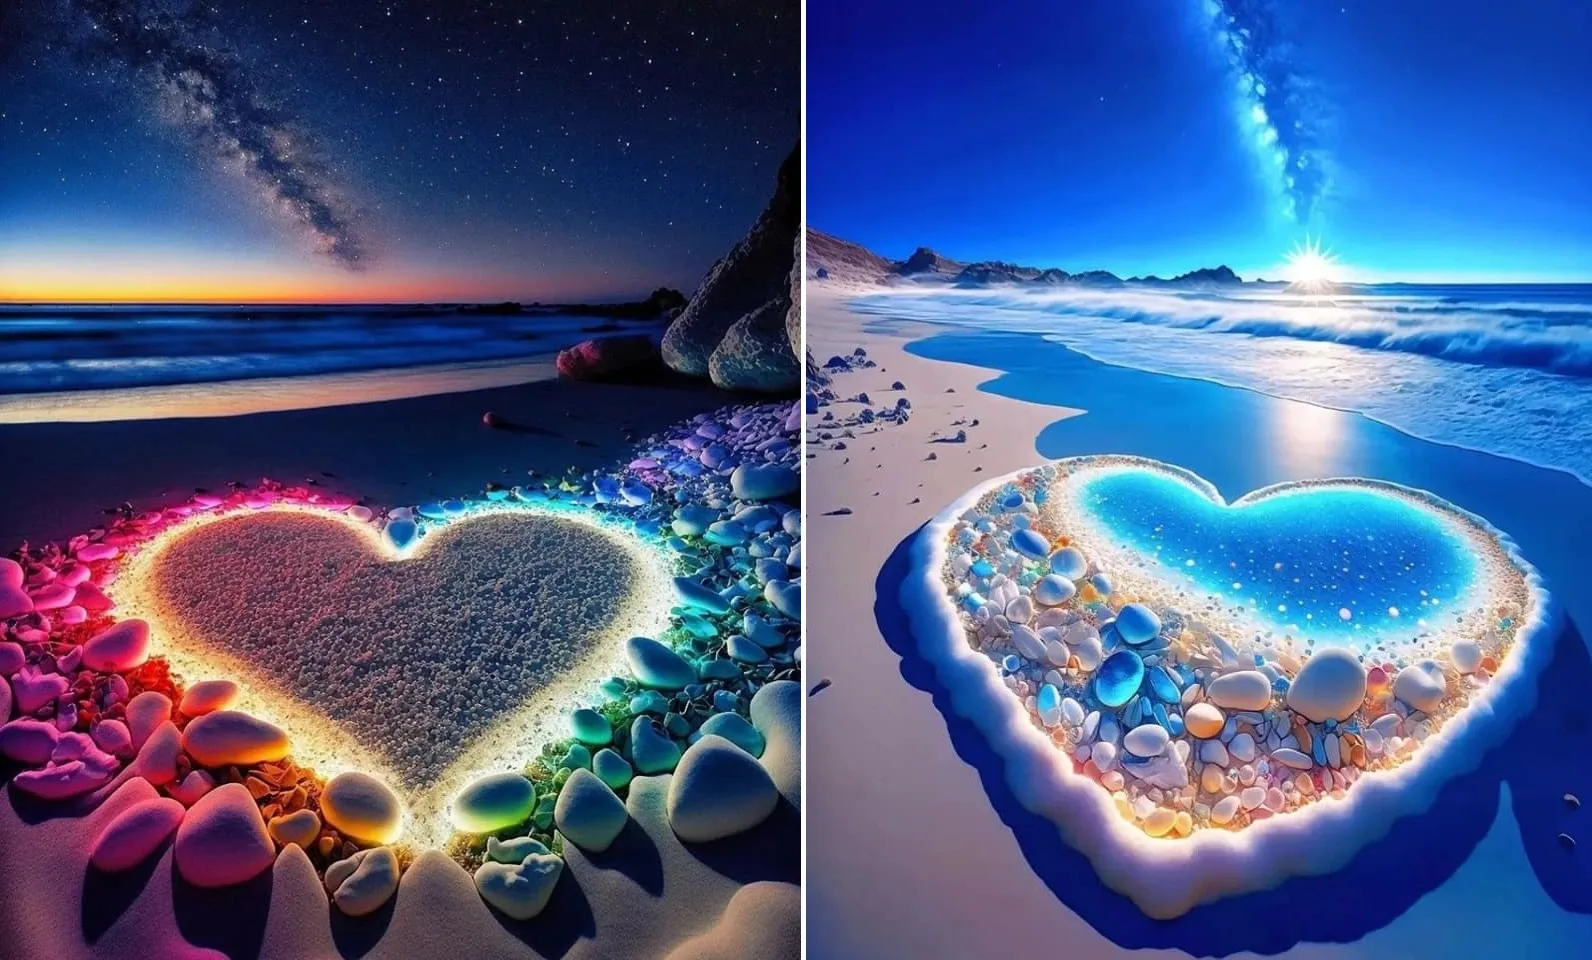 Gaze Upon The Enchanting Sparkle Of Dazzling Stones Adorning The World’s Most Breathtaking Beach